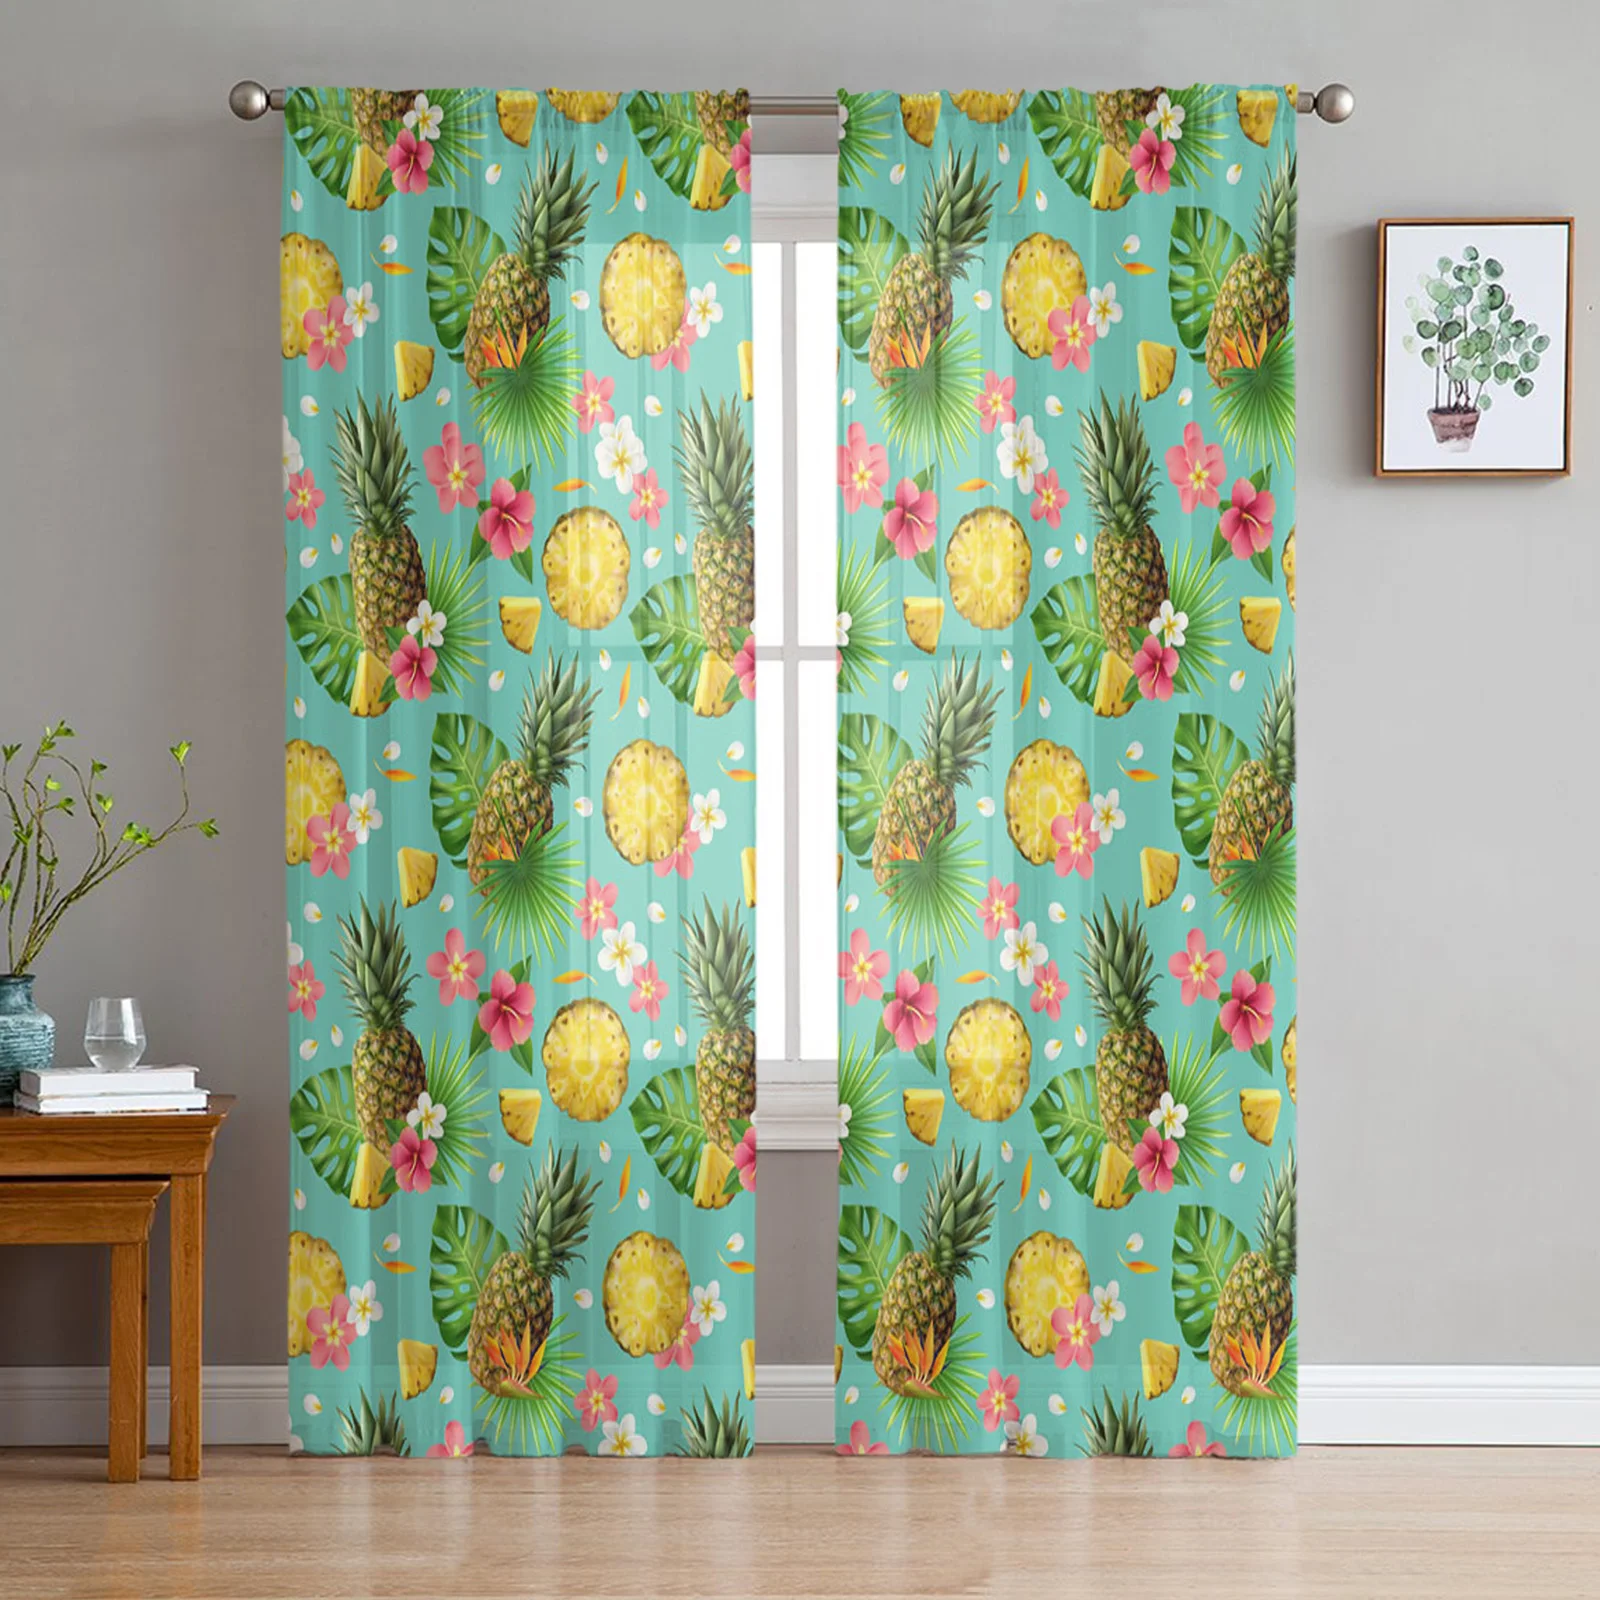 

Pineapple Palm Leaves Tulle Curtains For Living Room Voile Sheer Window Curtain For Bedroom Chiffon Curtains For Kitchen